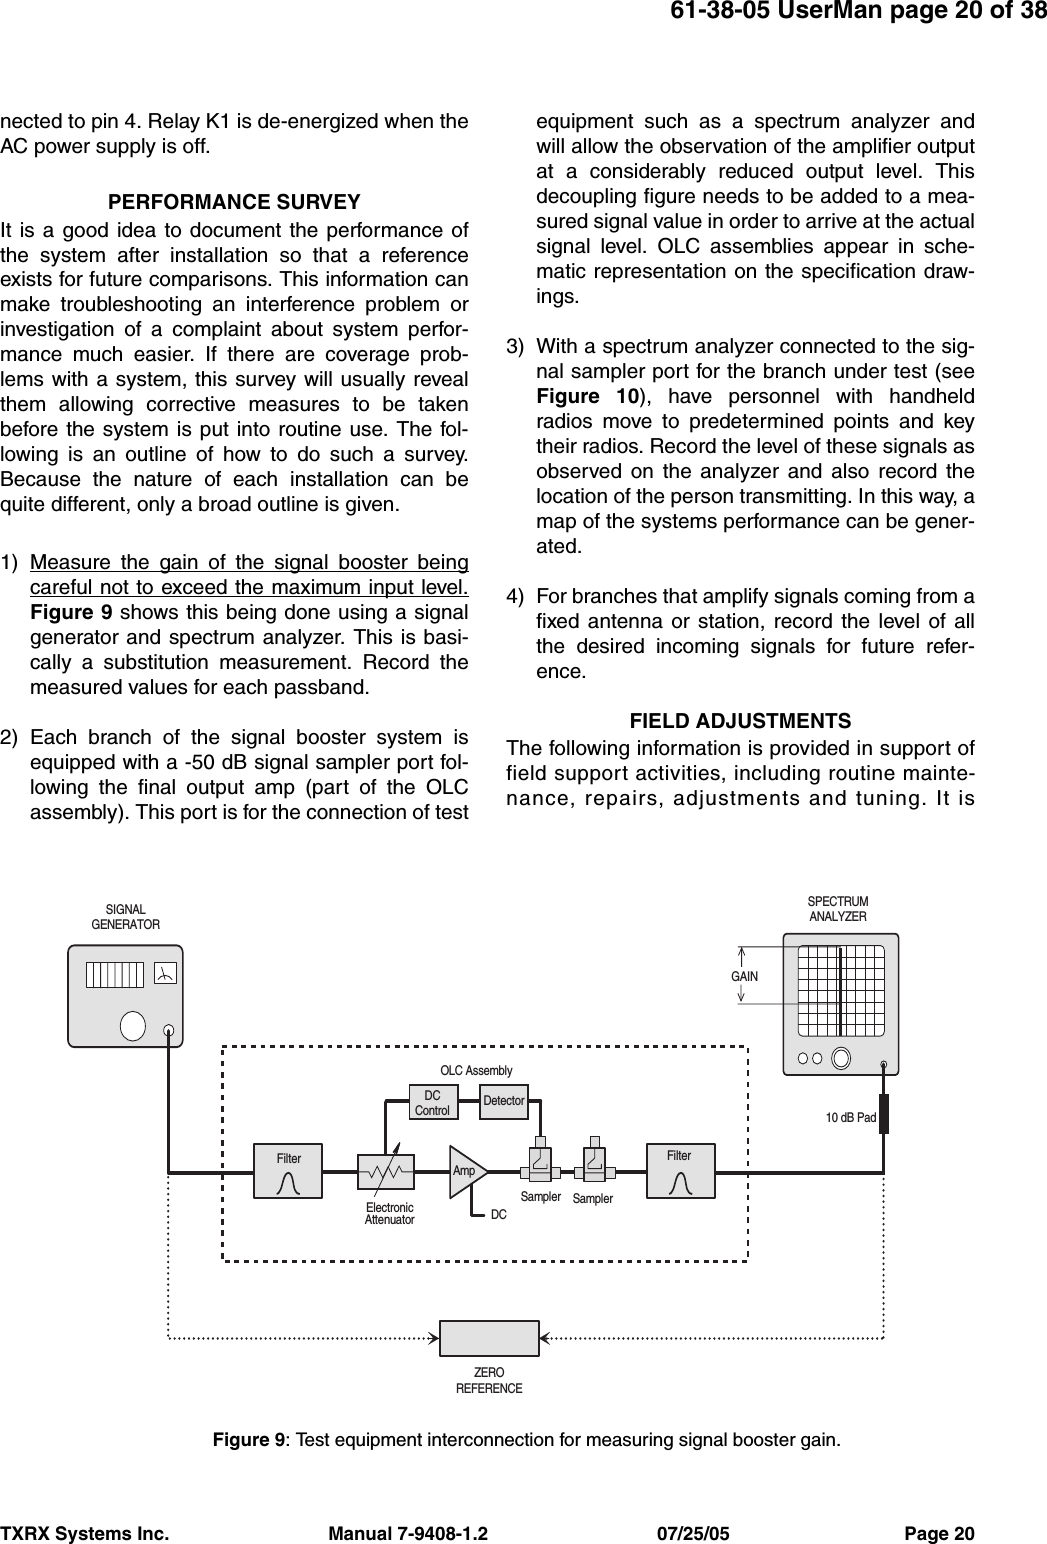 61-38-05 UserMan page 20 of 38TXRX Systems Inc.                               Manual 7-9408-1.2                                 07/25/05                                  Page 20nected to pin 4. Relay K1 is de-energized when theAC power supply is off.PERFORMANCE SURVEYIt is a good idea to document the performance ofthe system after installation so that a referenceexists for future comparisons. This information canmake troubleshooting an interference problem orinvestigation of a complaint about system perfor-mance much easier. If there are coverage prob-lems with a system, this survey will usually revealthem allowing corrective measures to be takenbefore the system is put into routine use. The fol-lowing is an outline of how to do such a survey.Because the nature of each installation can bequite different, only a broad outline is given.1) Measure the gain of the signal booster beingcareful not to exceed the maximum input level.Figure 9 shows this being done using a signalgenerator and spectrum analyzer. This is basi-cally a substitution measurement. Record themeasured values for each passband.2) Each branch of the signal booster system isequipped with a -50 dB signal sampler port fol-lowing the final output amp (part of the OLCassembly). This port is for the connection of testequipment such as a spectrum analyzer andwill allow the observation of the amplifier outputat a considerably reduced output level. Thisdecoupling figure needs to be added to a mea-sured signal value in order to arrive at the actualsignal level. OLC assemblies appear in sche-matic representation on the specification draw-ings.3) With a spectrum analyzer connected to the sig-nal sampler port for the branch under test (seeFigure 10), have personnel with handheldradios move to predetermined points and keytheir radios. Record the level of these signals asobserved on the analyzer and also record thelocation of the person transmitting. In this way, amap of the systems performance can be gener-ated.4) For branches that amplify signals coming from afixed antenna or station, record the level of allthe desired incoming signals for future refer-ence.FIELD ADJUSTMENTSThe following information is provided in support offield support activities, including routine mainte-nance, repairs, adjustments and tuning. It isDCSampler SamplerDetectorElectronicAttenuatorOLC AssemblyFilter FilterAmpDCControlZEROREFERENCEGAIN10 dB PadSIGNALGENERATORSPECTRUMANALYZERFigure 9: Test equipment interconnection for measuring signal booster gain.